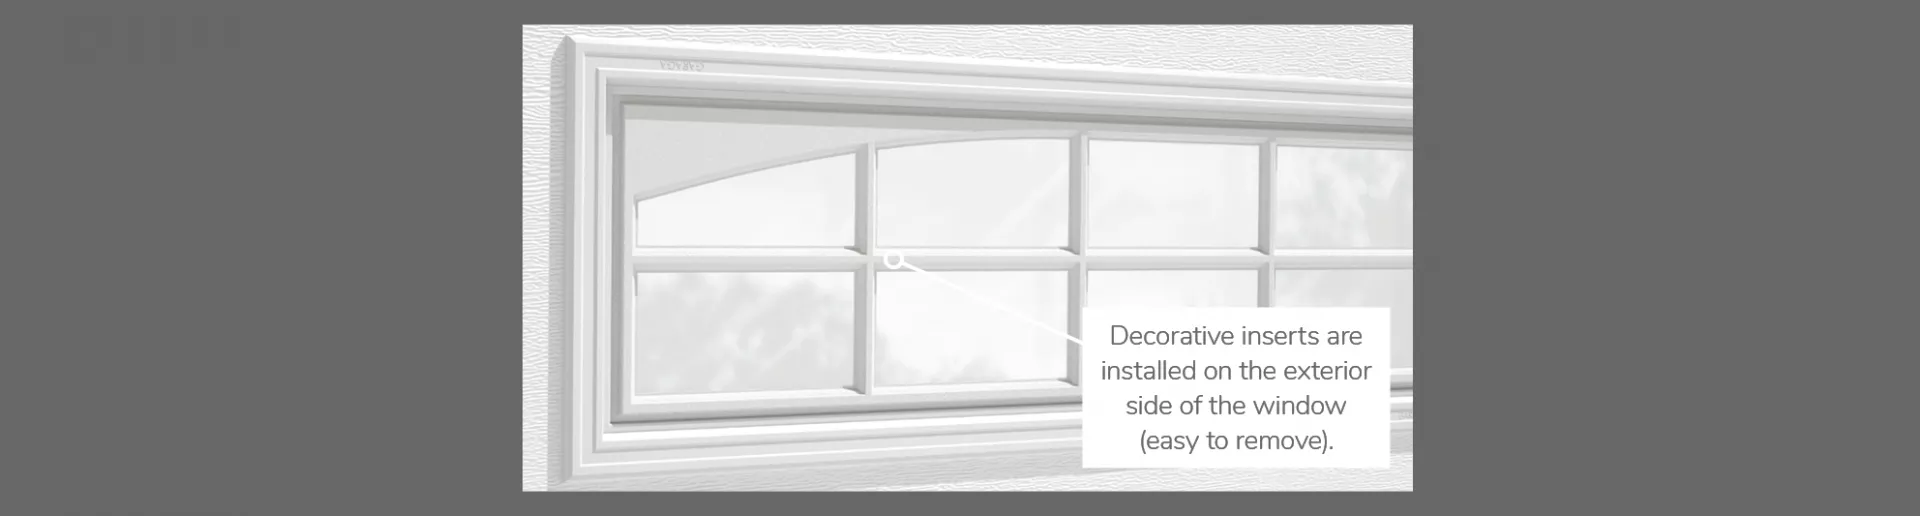 Double Stockton Arch Decorative Inserts, 40" x 13", available for door R-16 and R-12